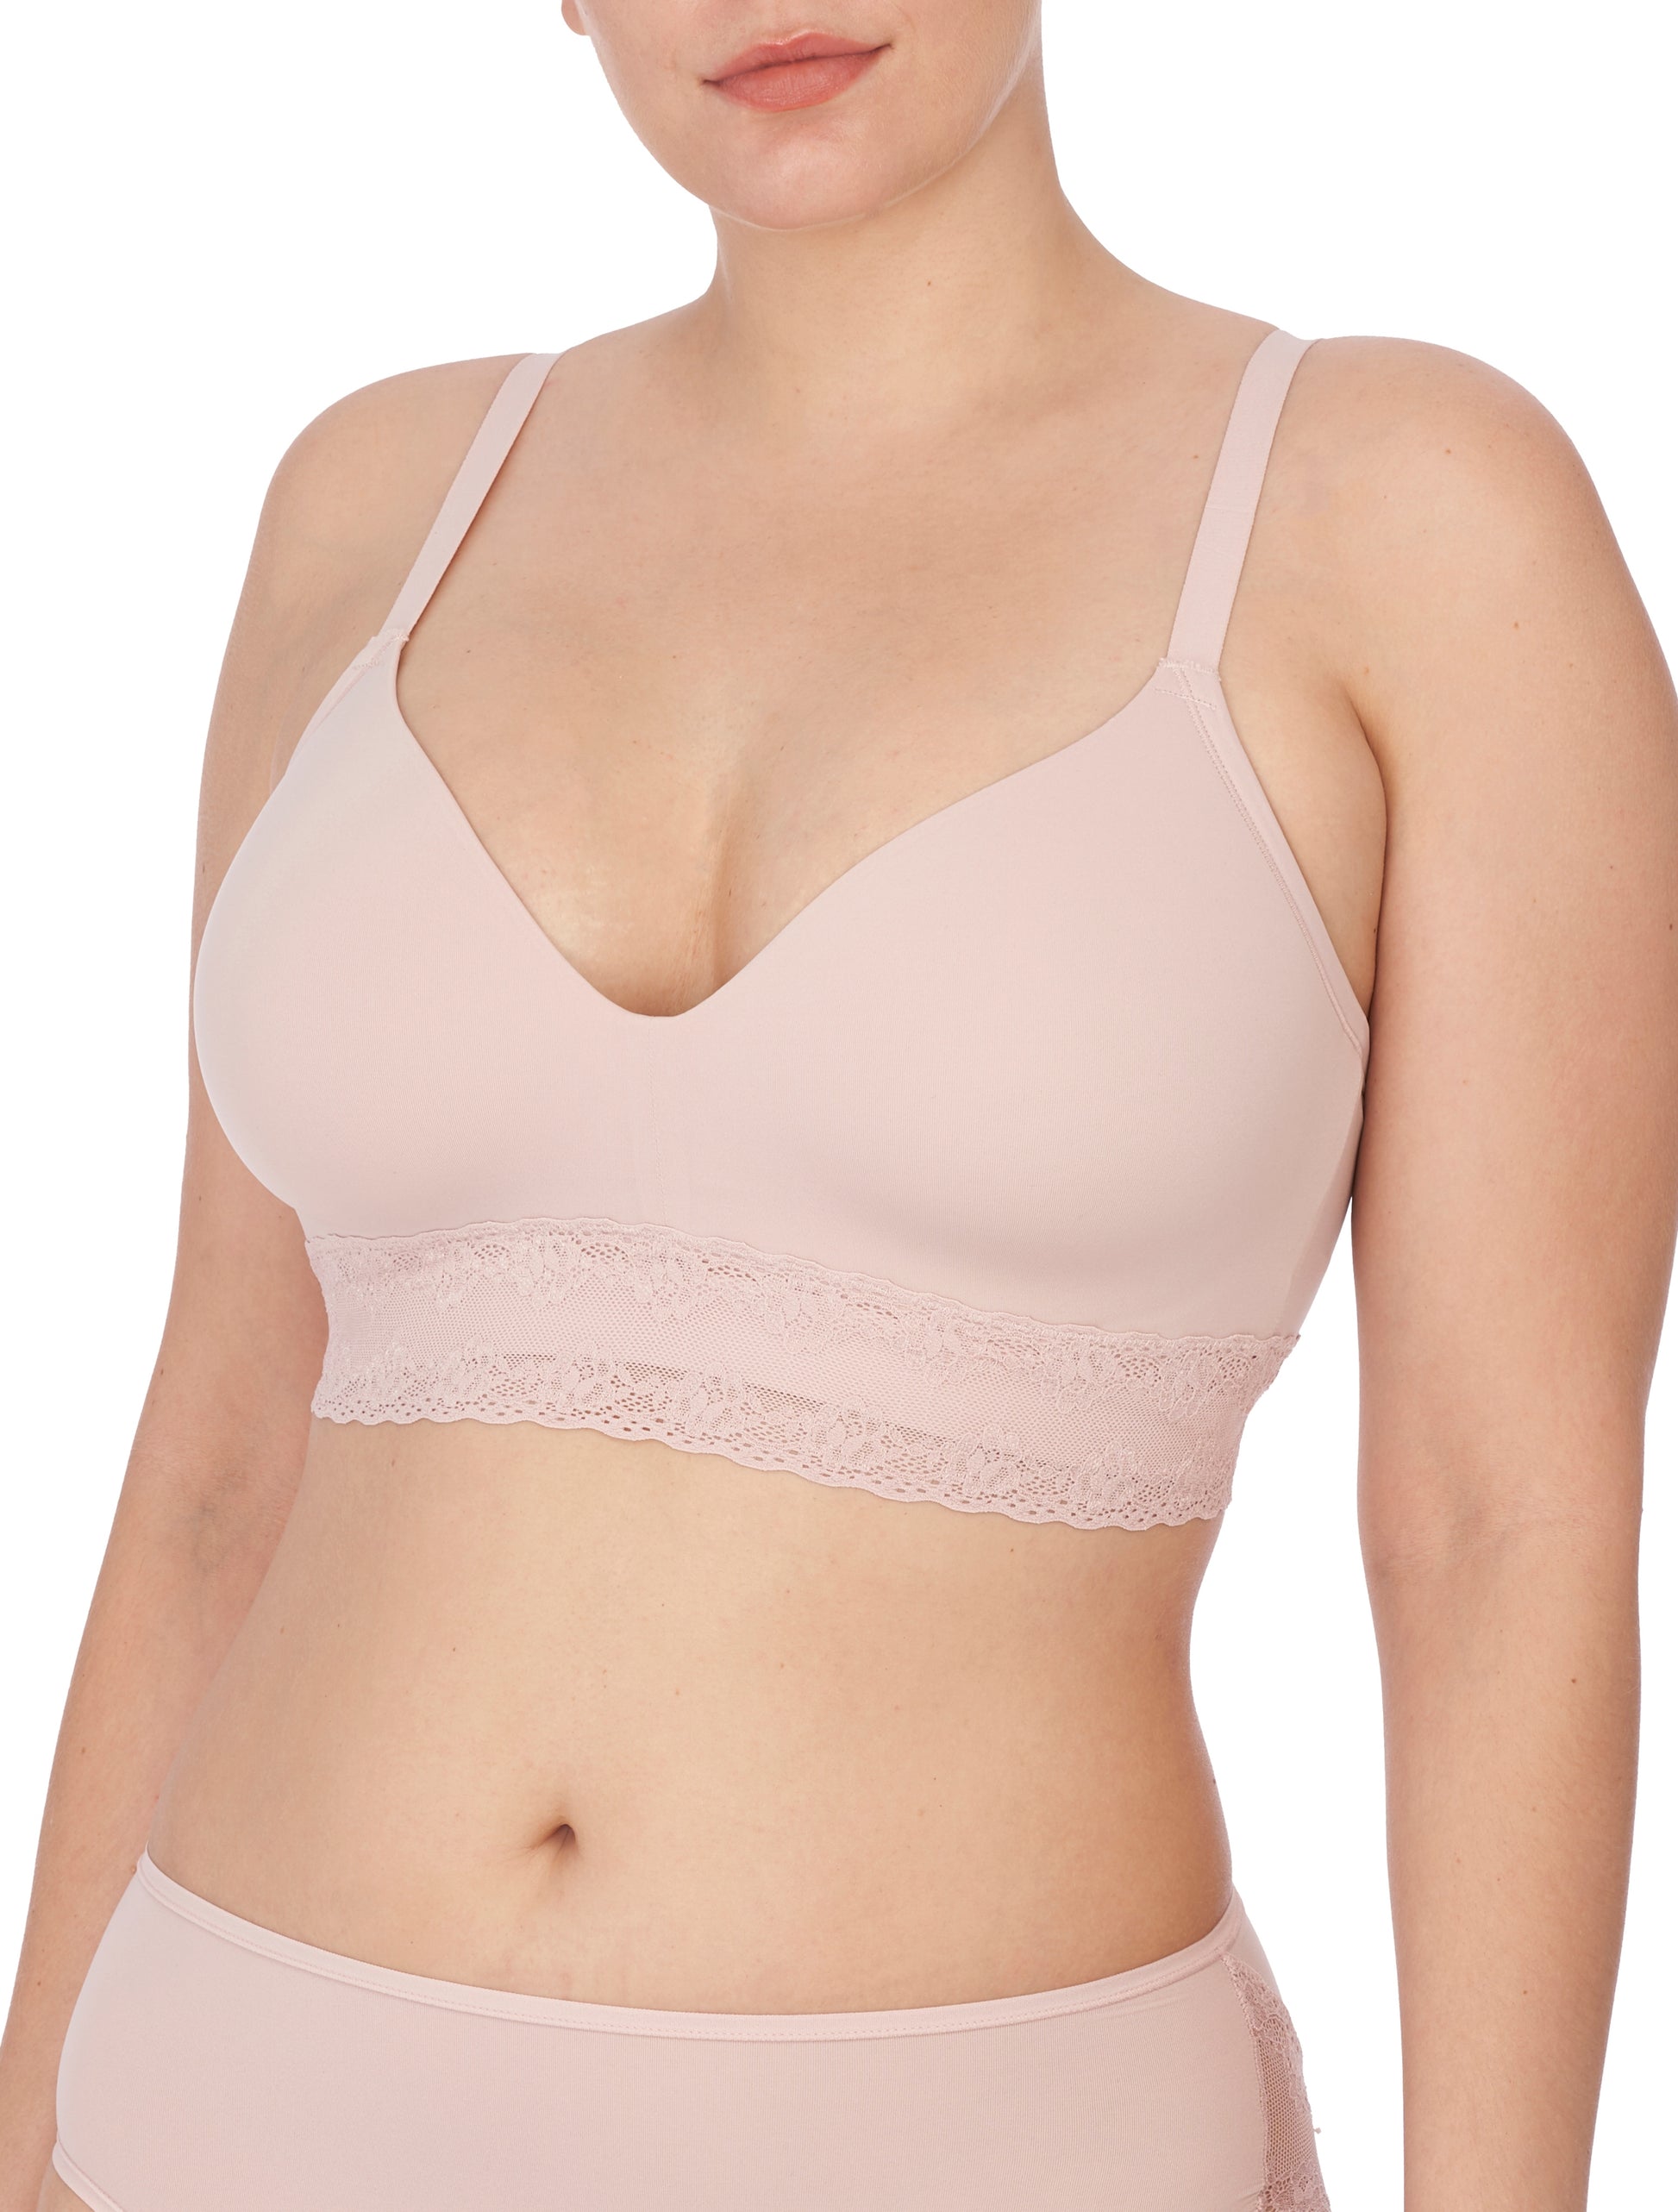 Bliss perfection 723154 Rose beige and light pink contour soft cup bra sports bra